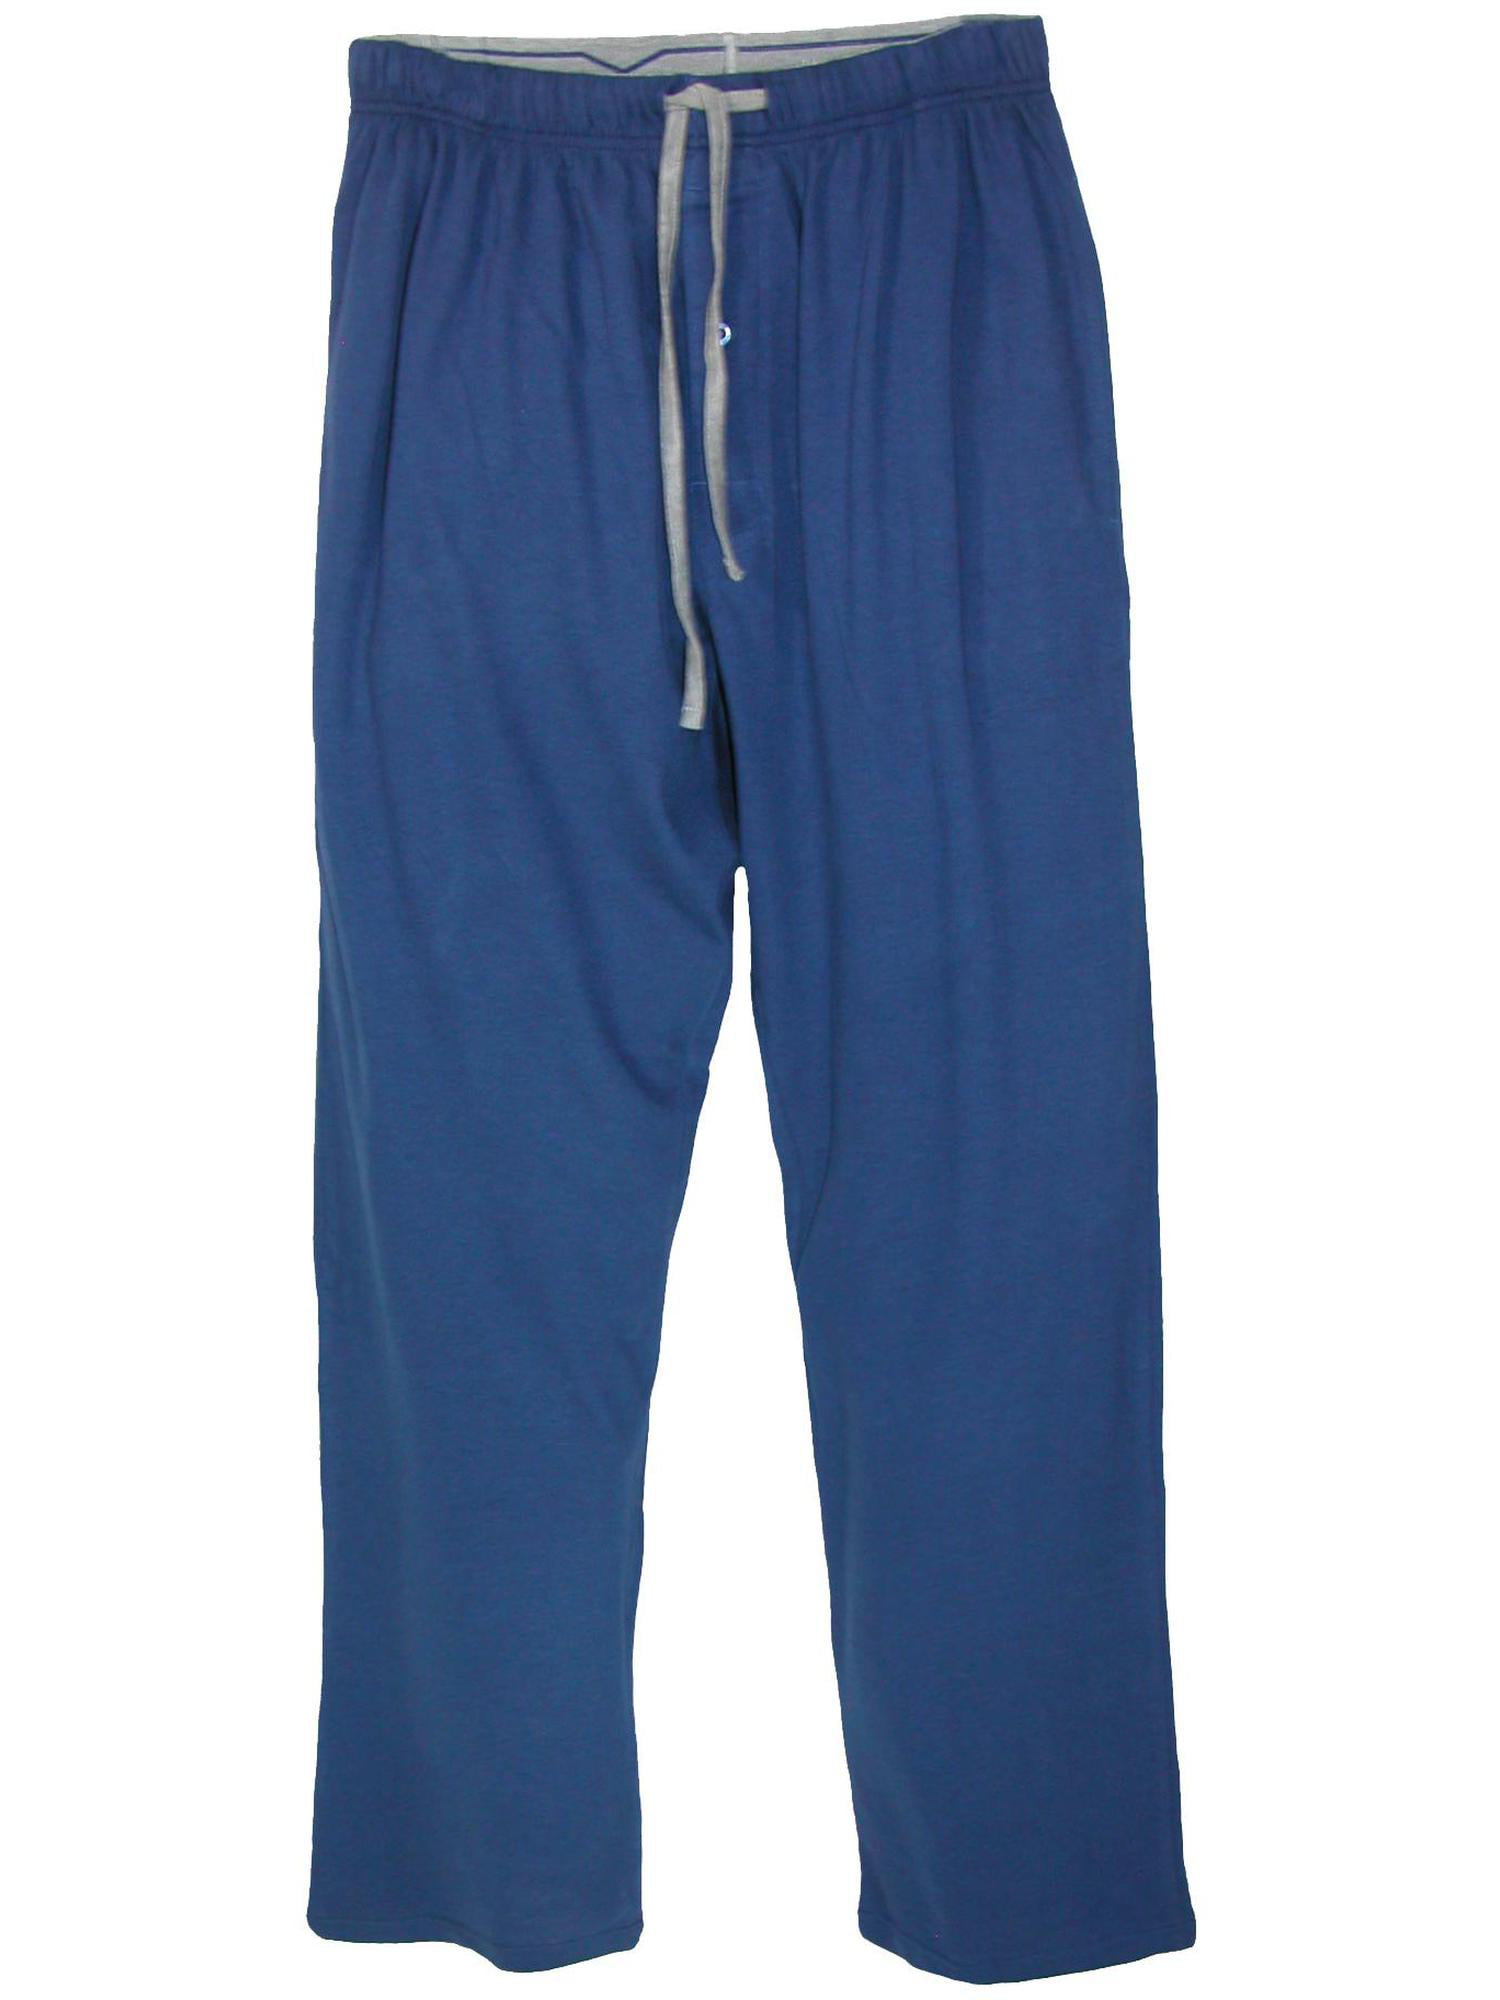 Hanes X-Temp Men's Tagless Knit Sleep Pant Size Small in Blue 